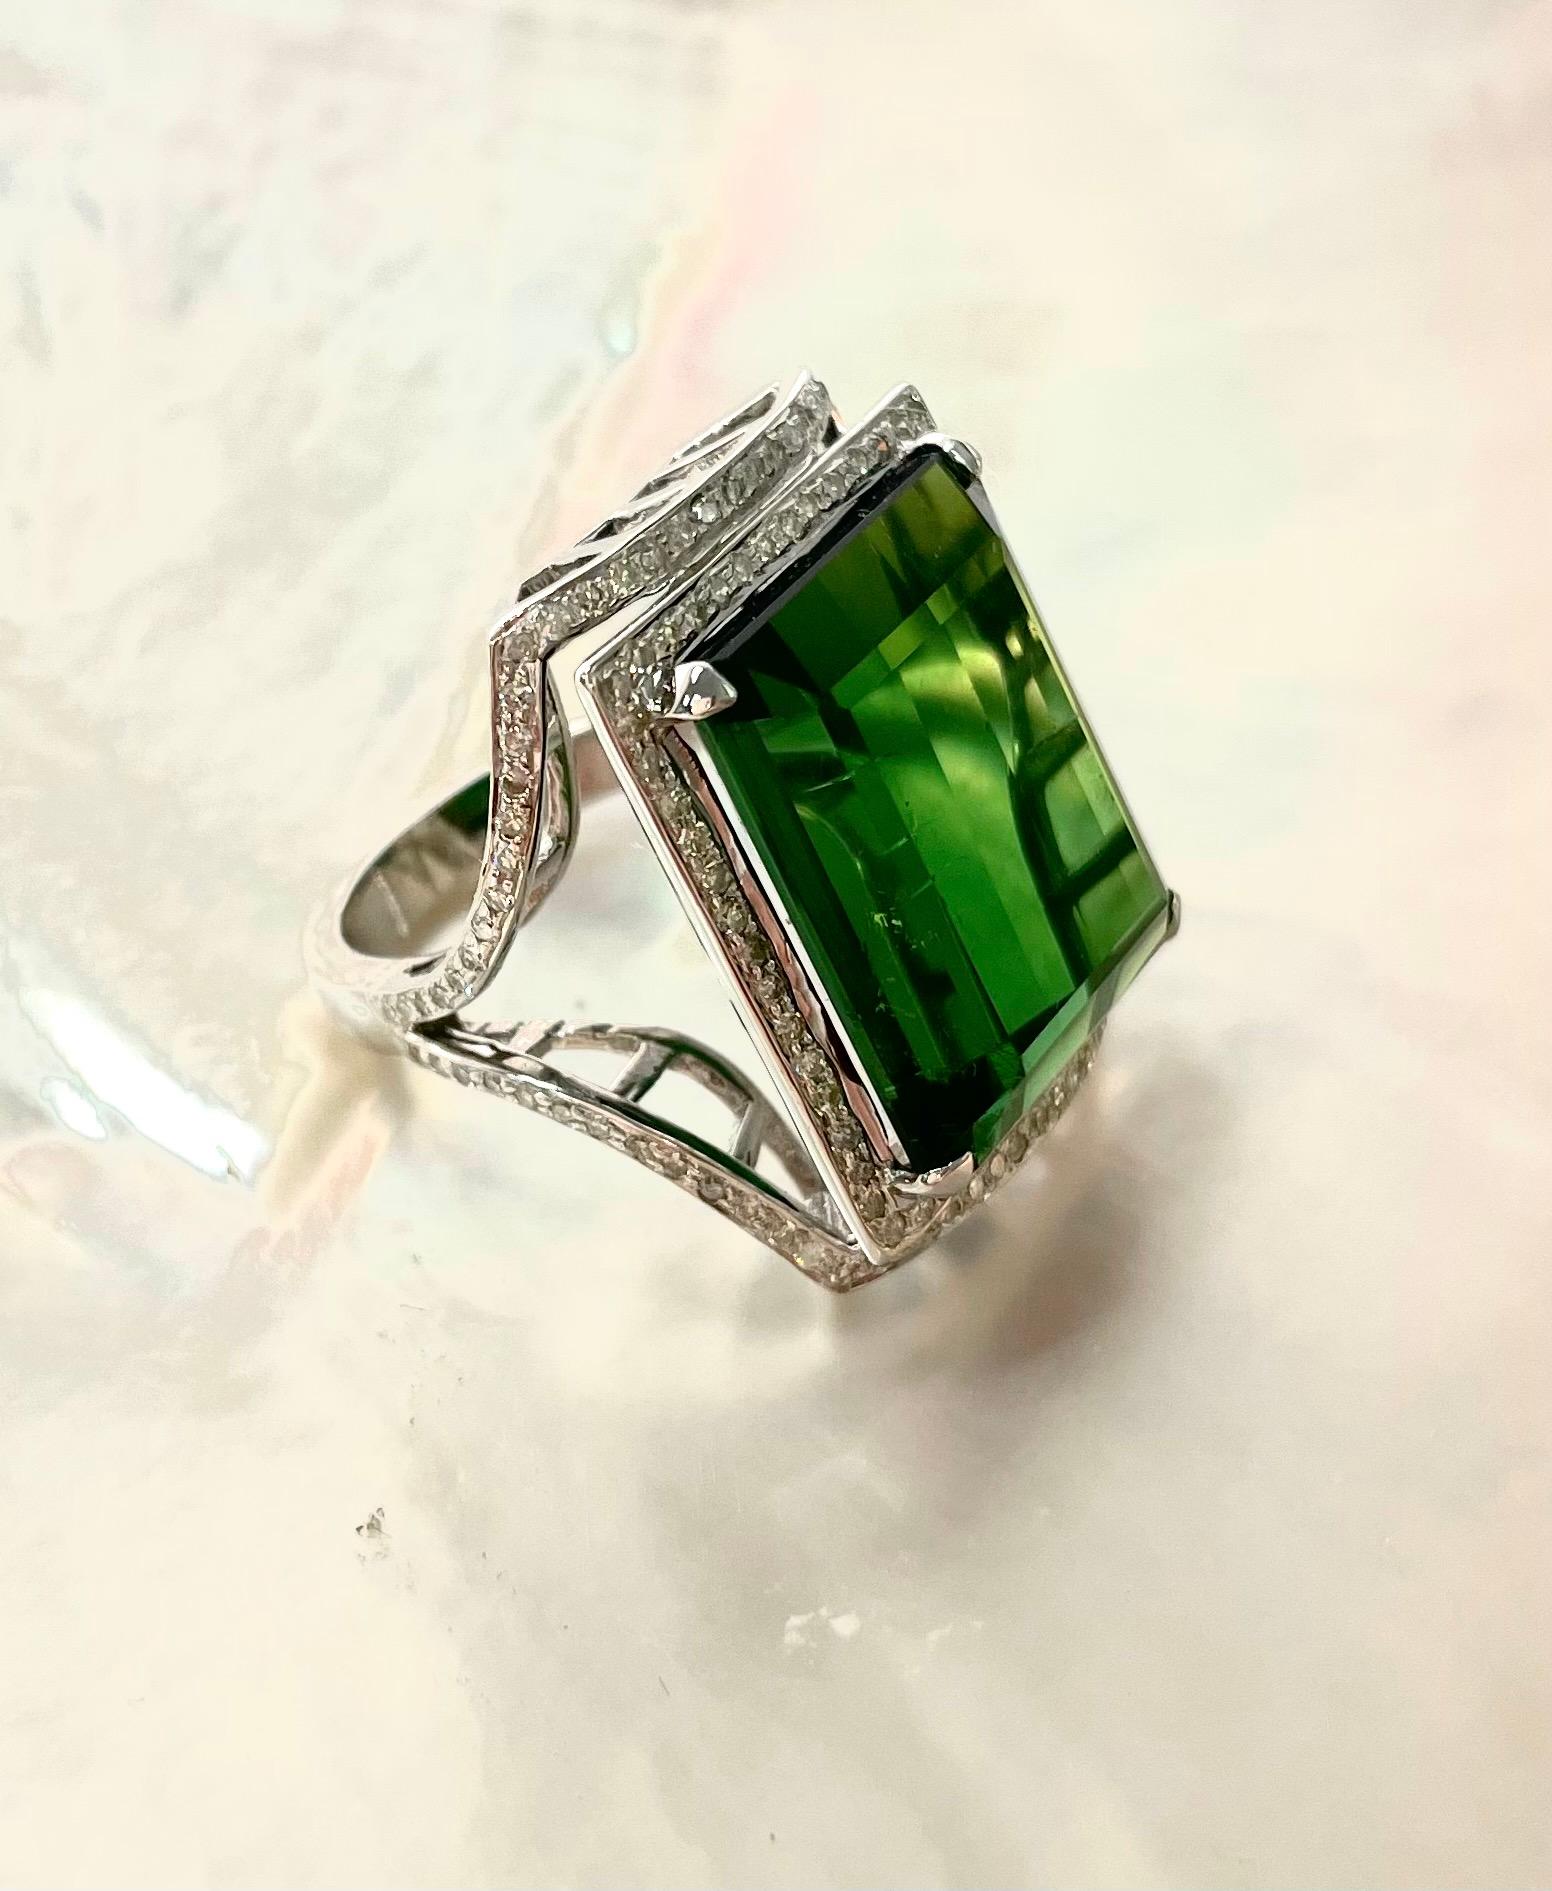 Green Tourmaline 25.2cts Emerald Cut with Pave Diamonds Ring For Sale 2